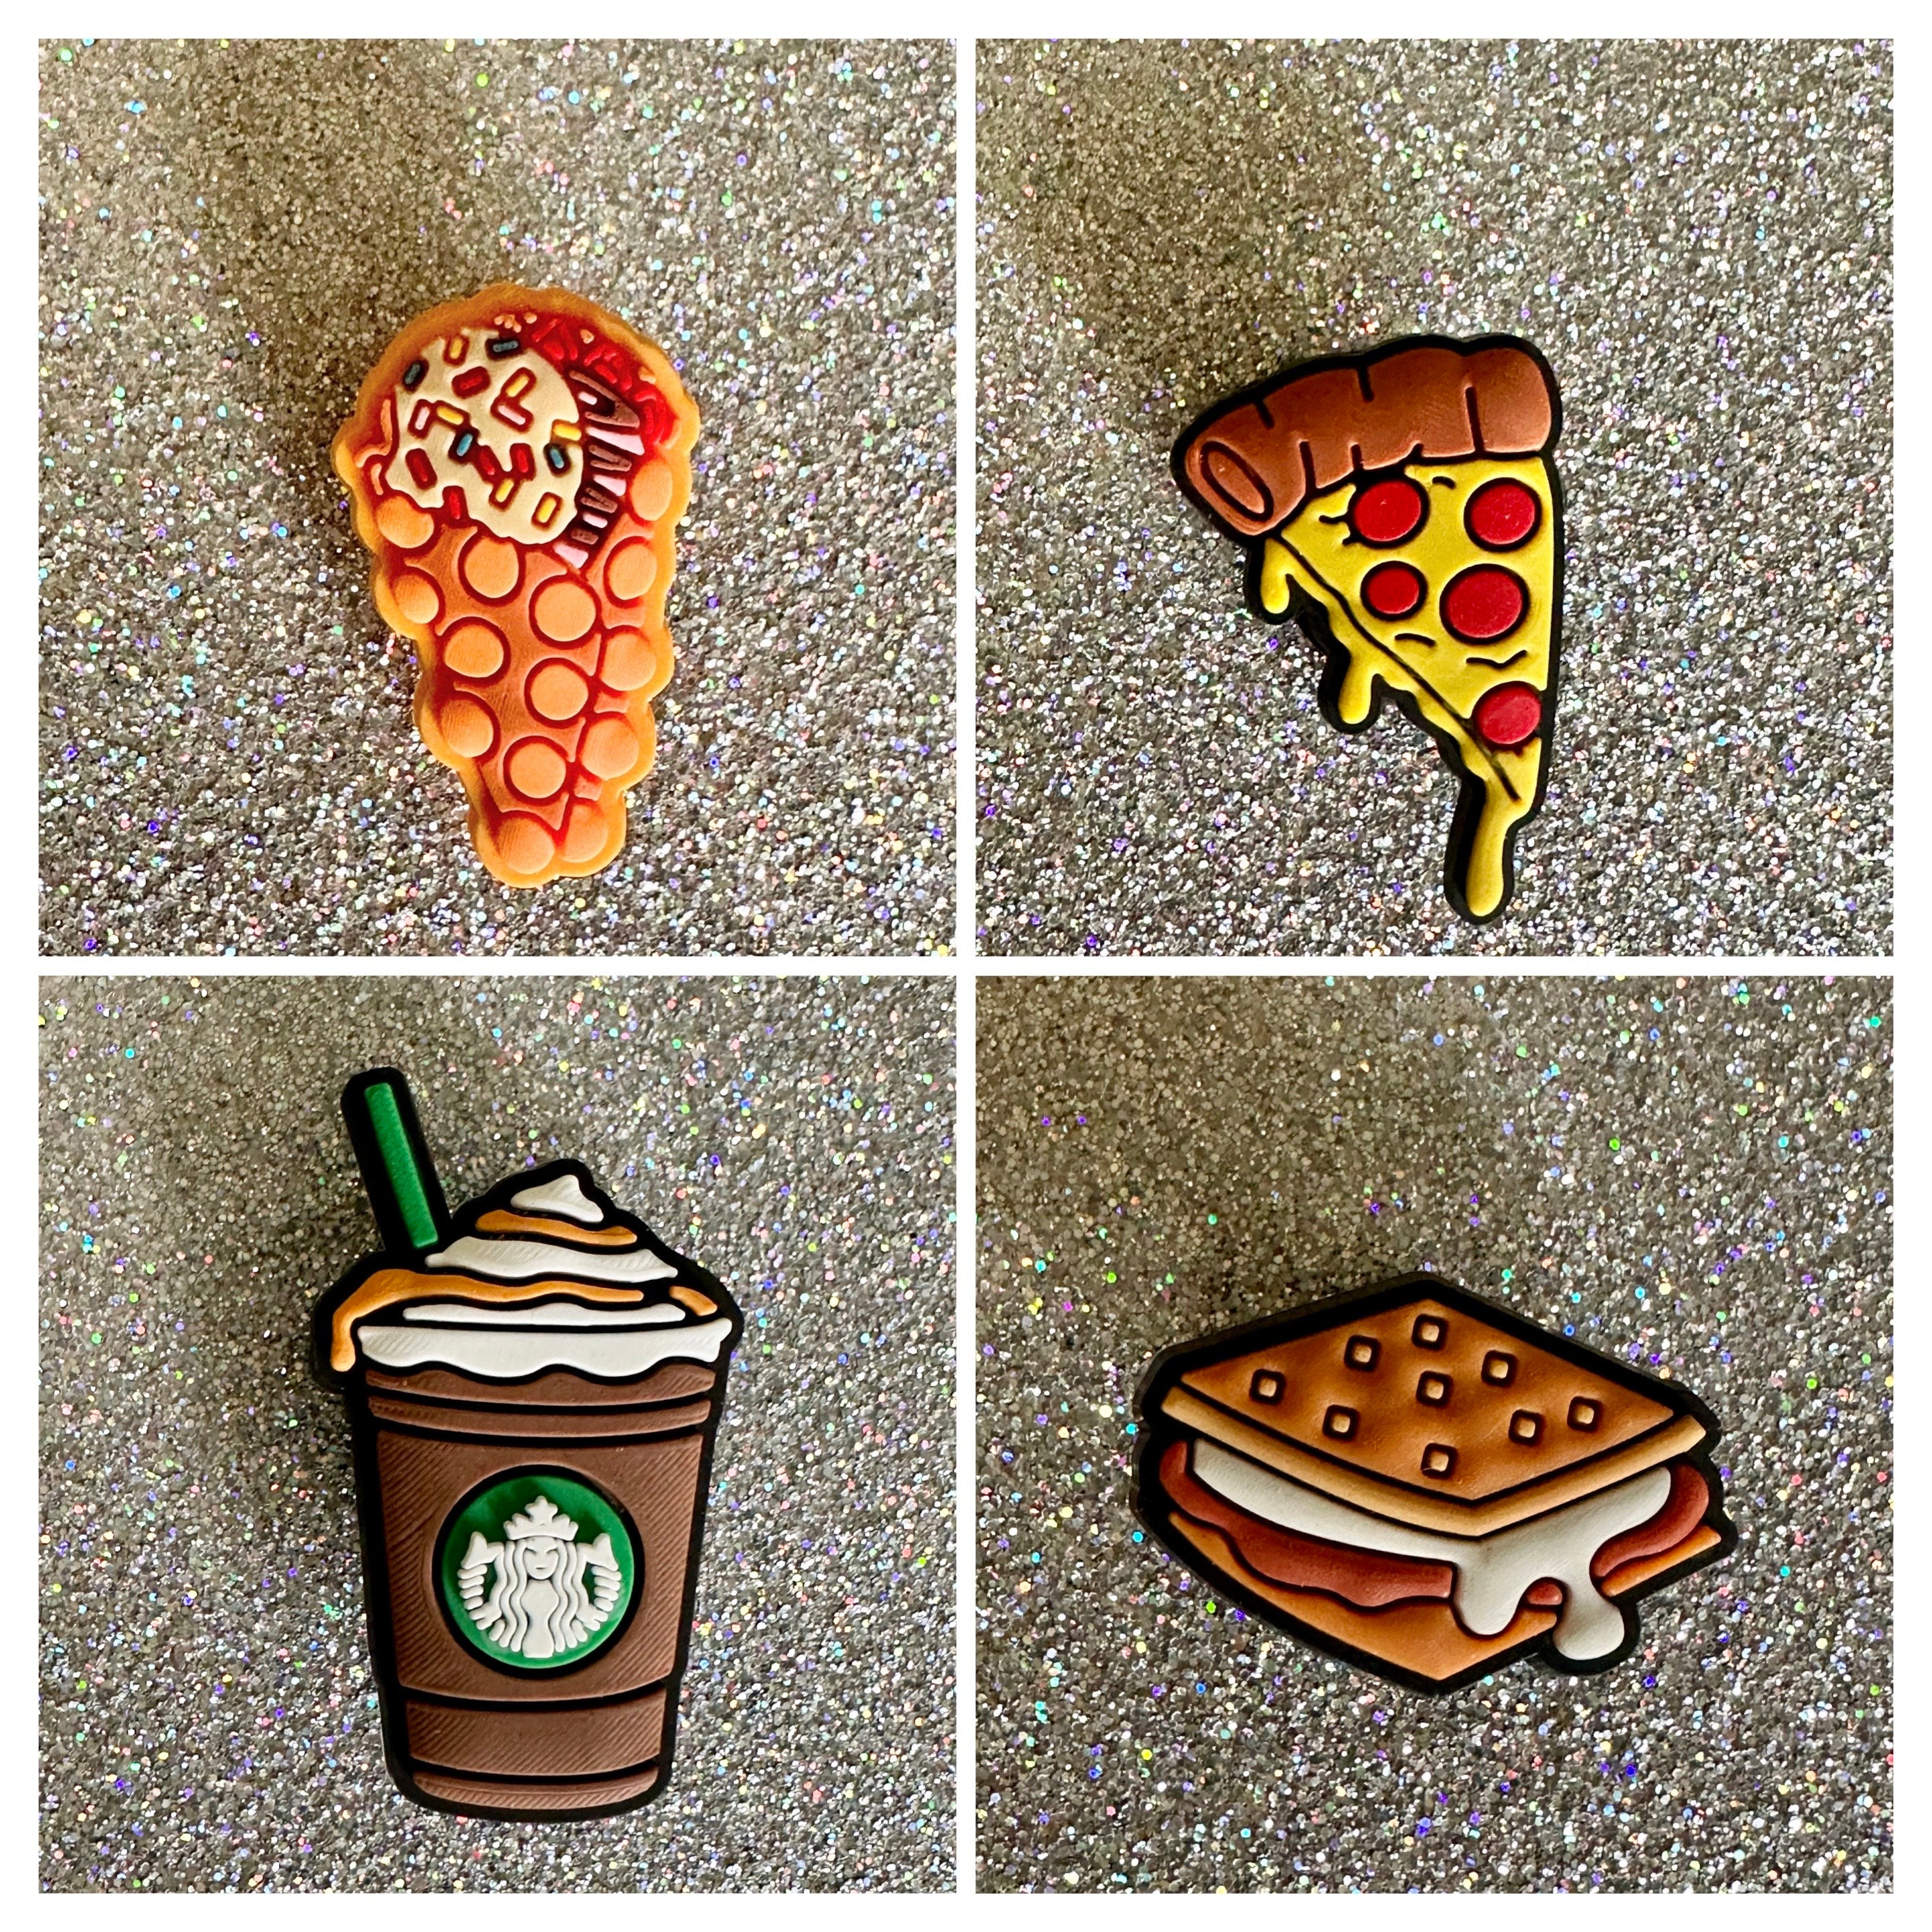 Fast Food Charms by Creatology™, 4ct.